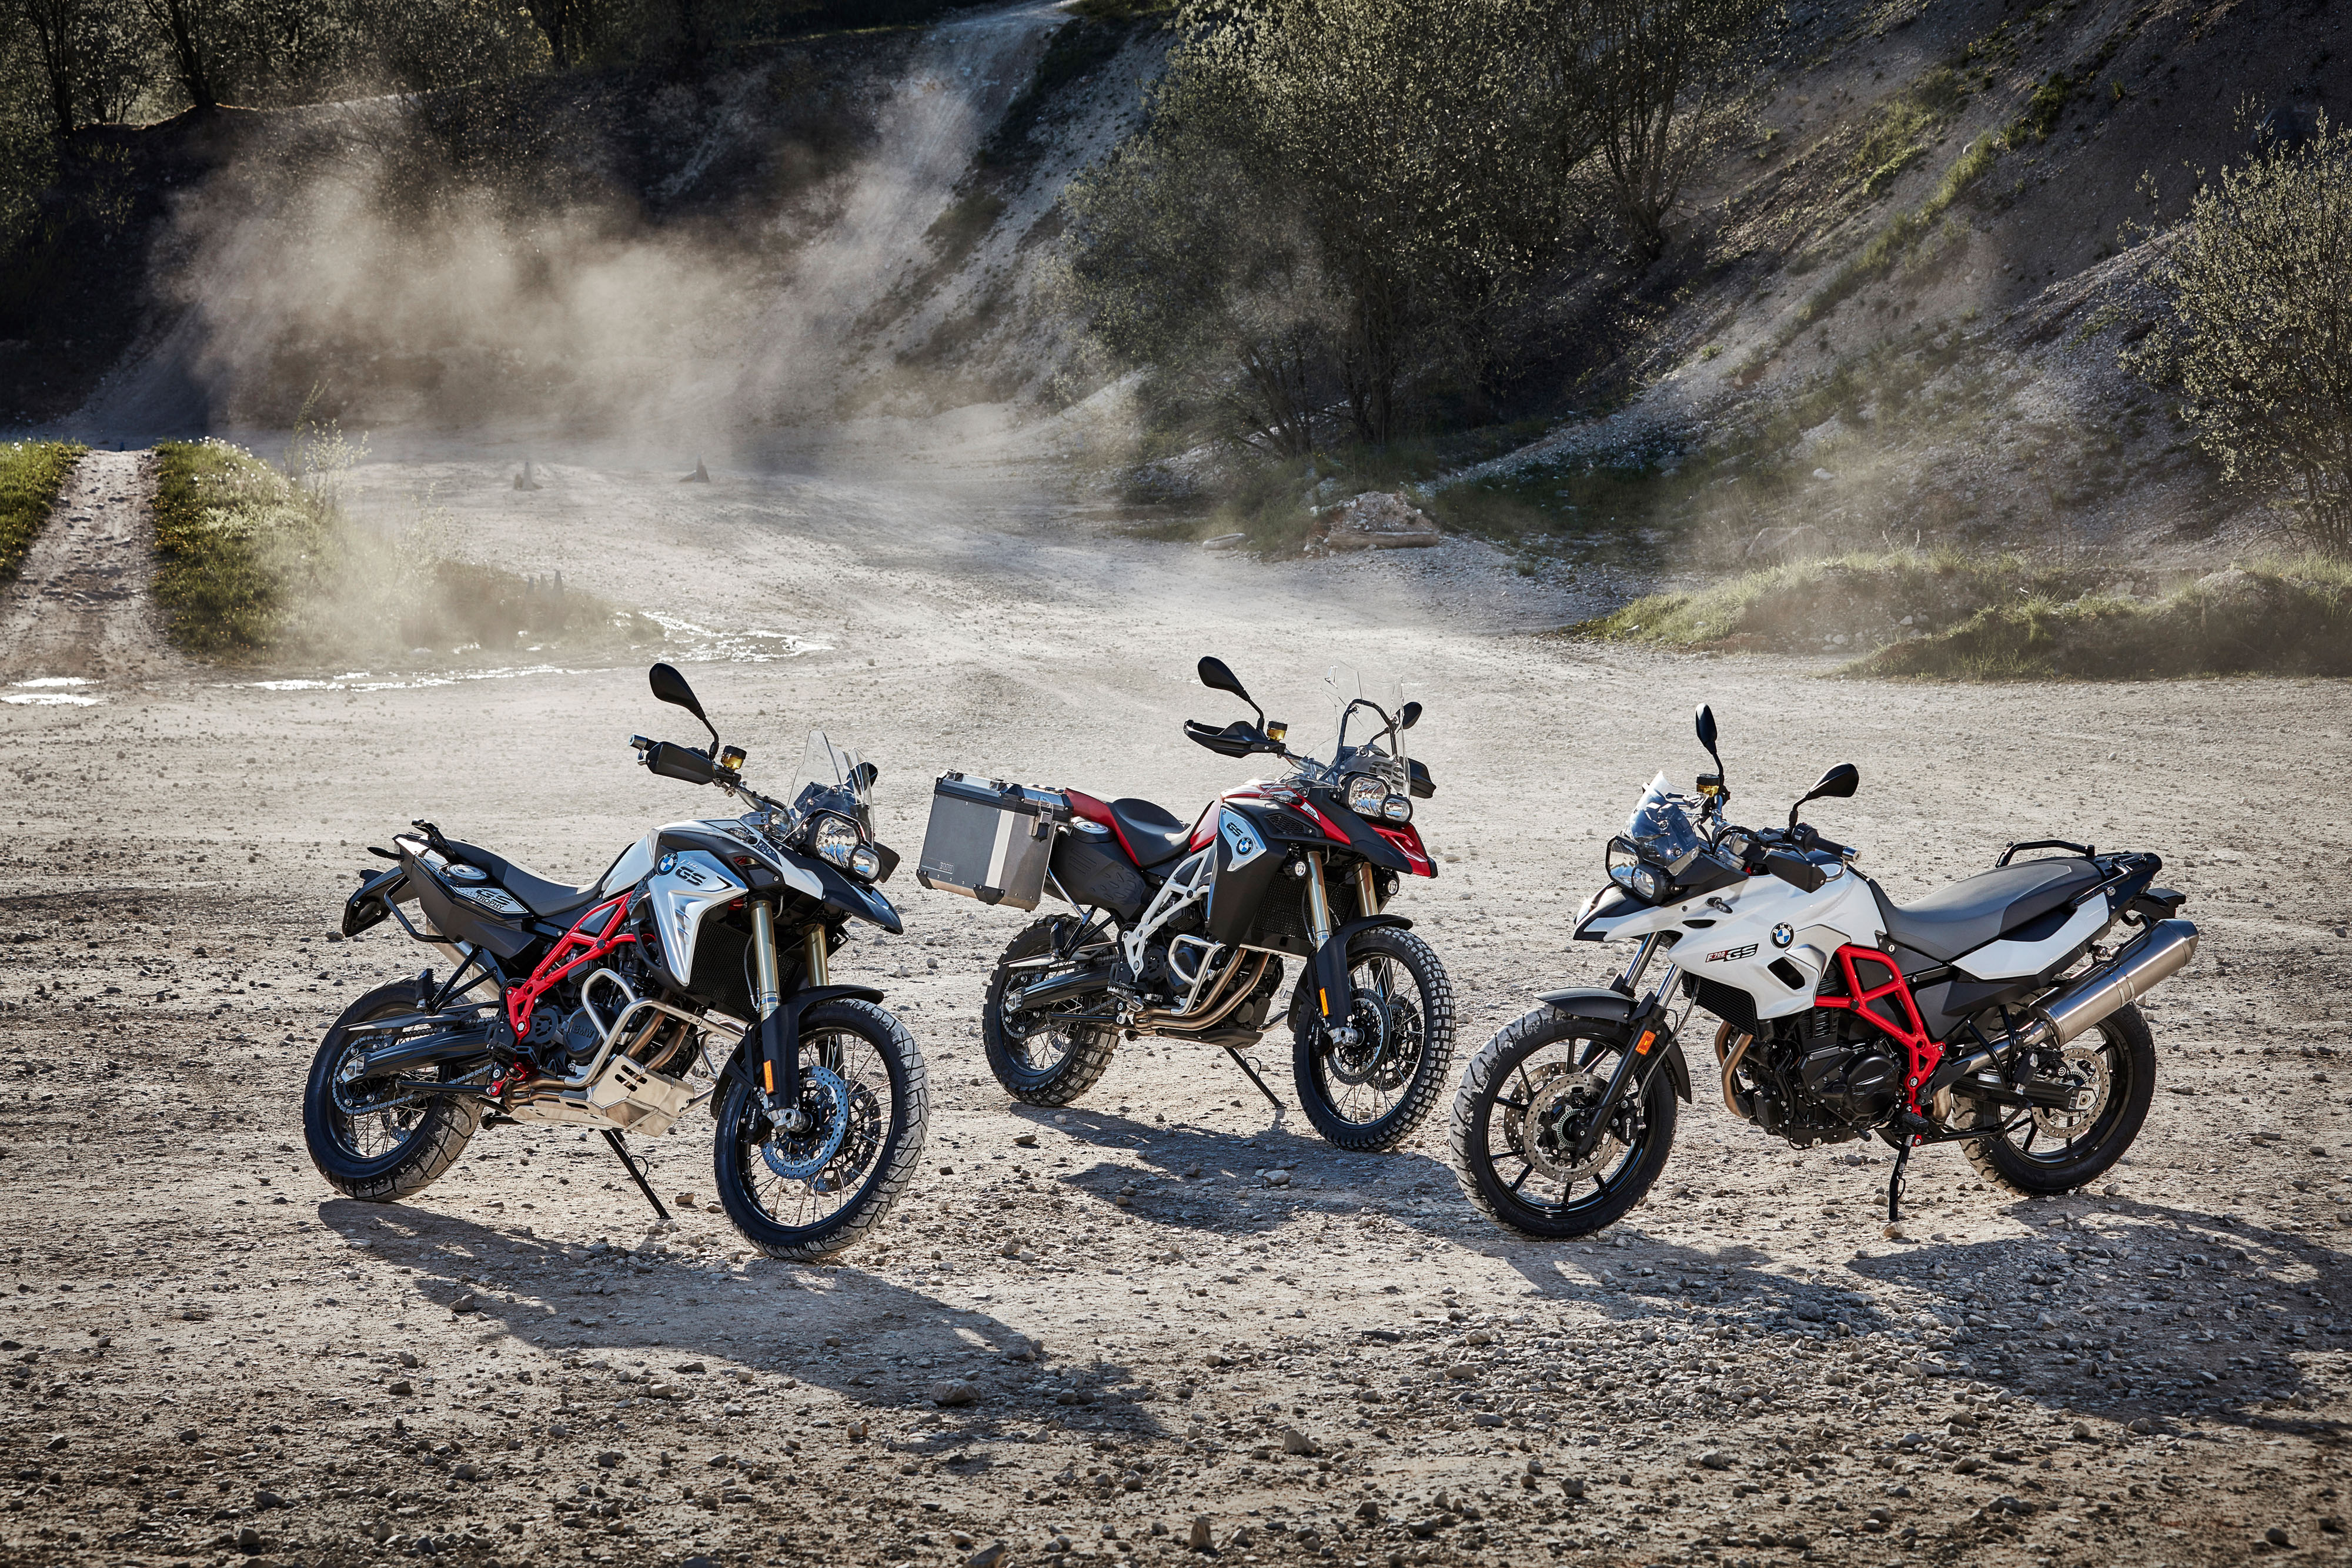 New F 700 Gs, F 800 Gs, Adventure - Bike Review